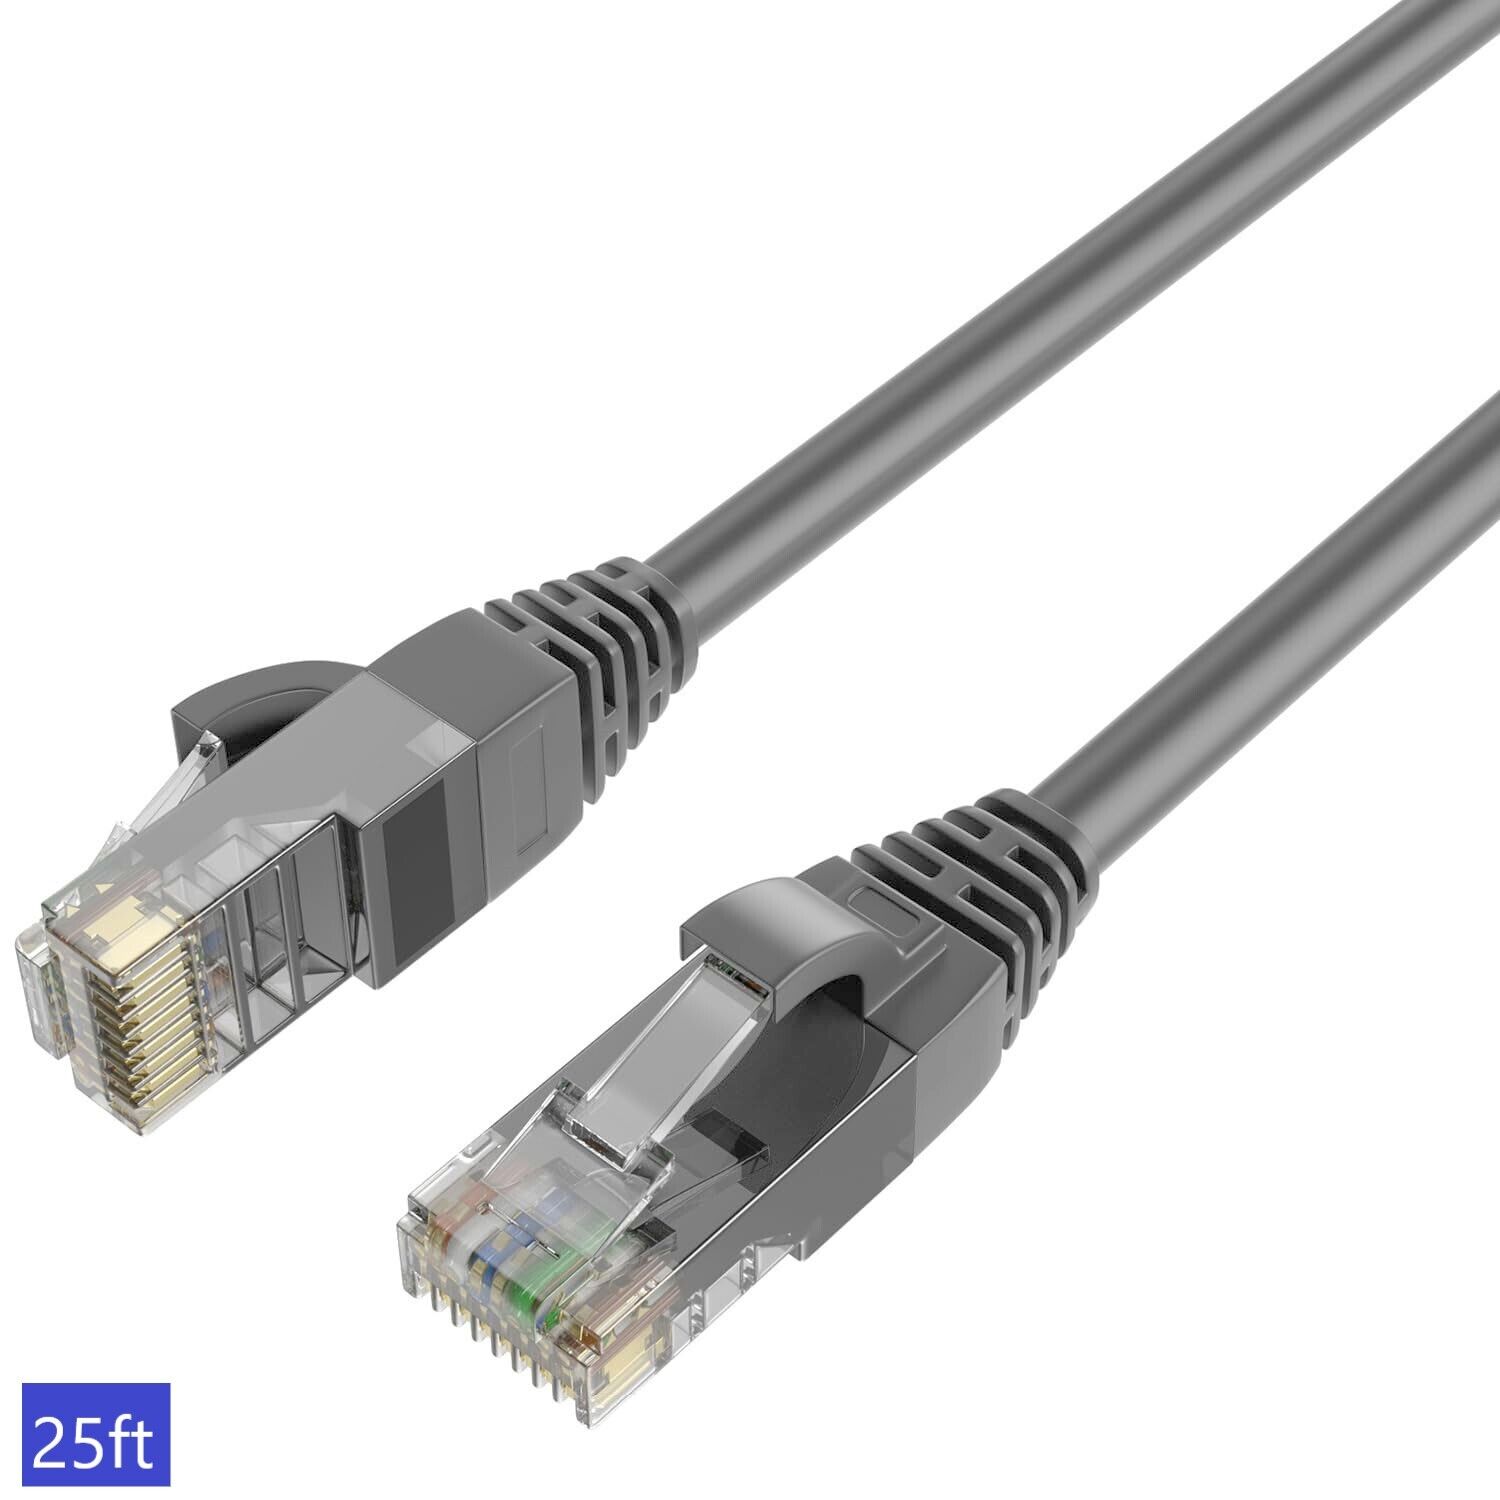 QualGear Cat 6 High-Speed Ethernet Cable - Gray